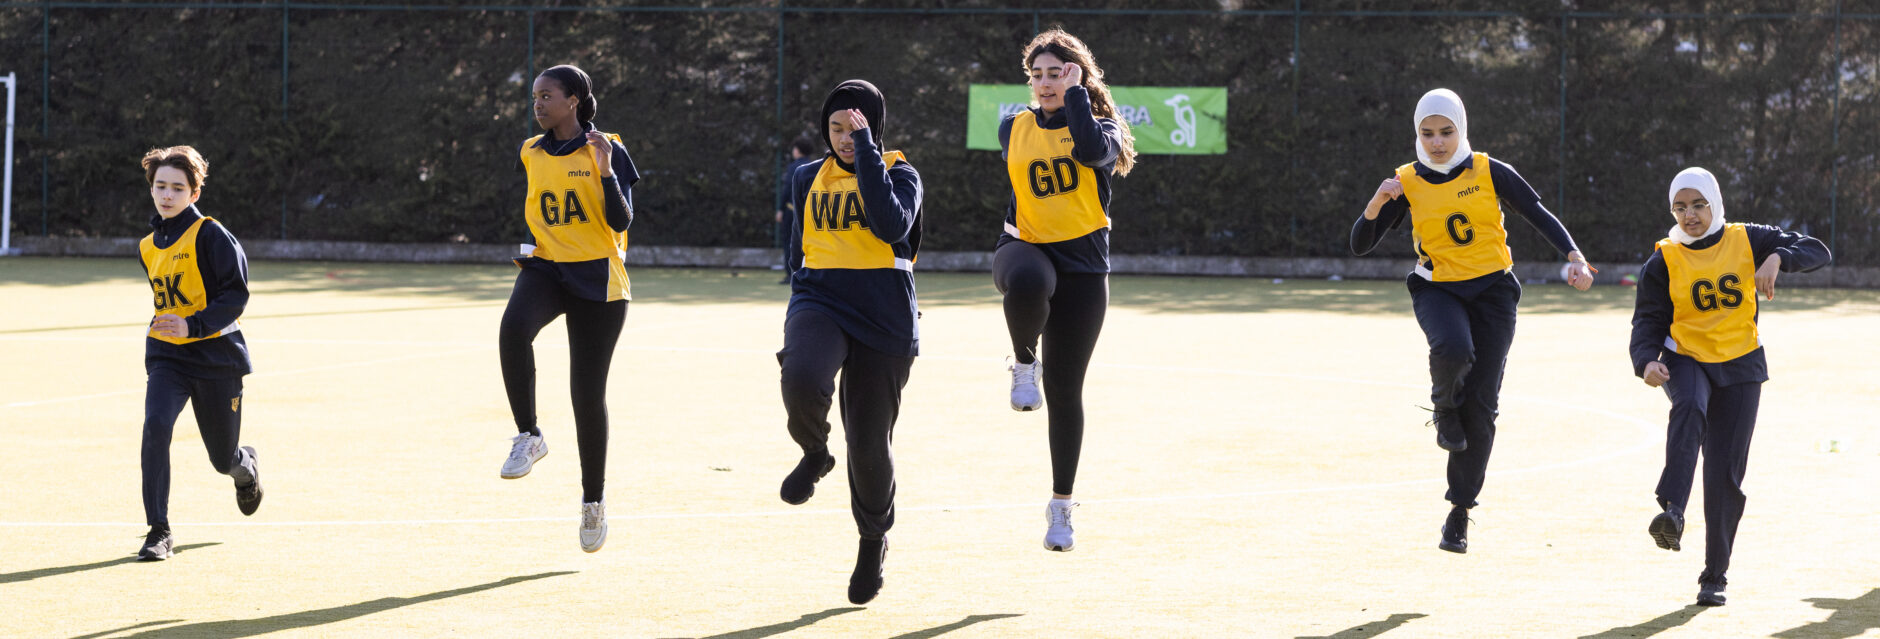 students from the Netball team running along the court